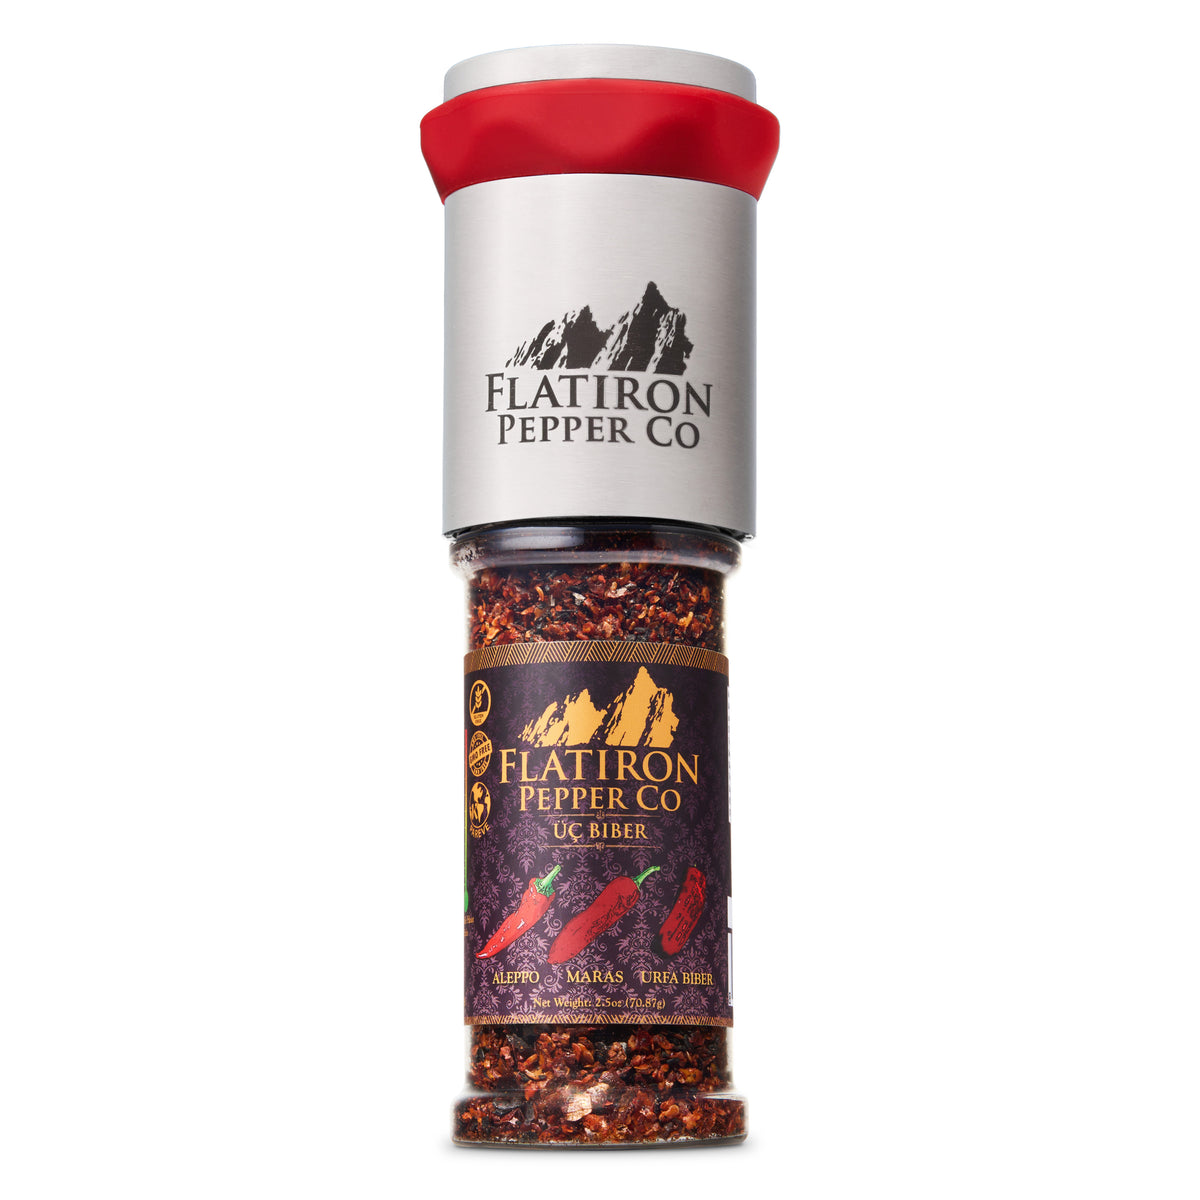 Chile pepper grinder with Uc Biber